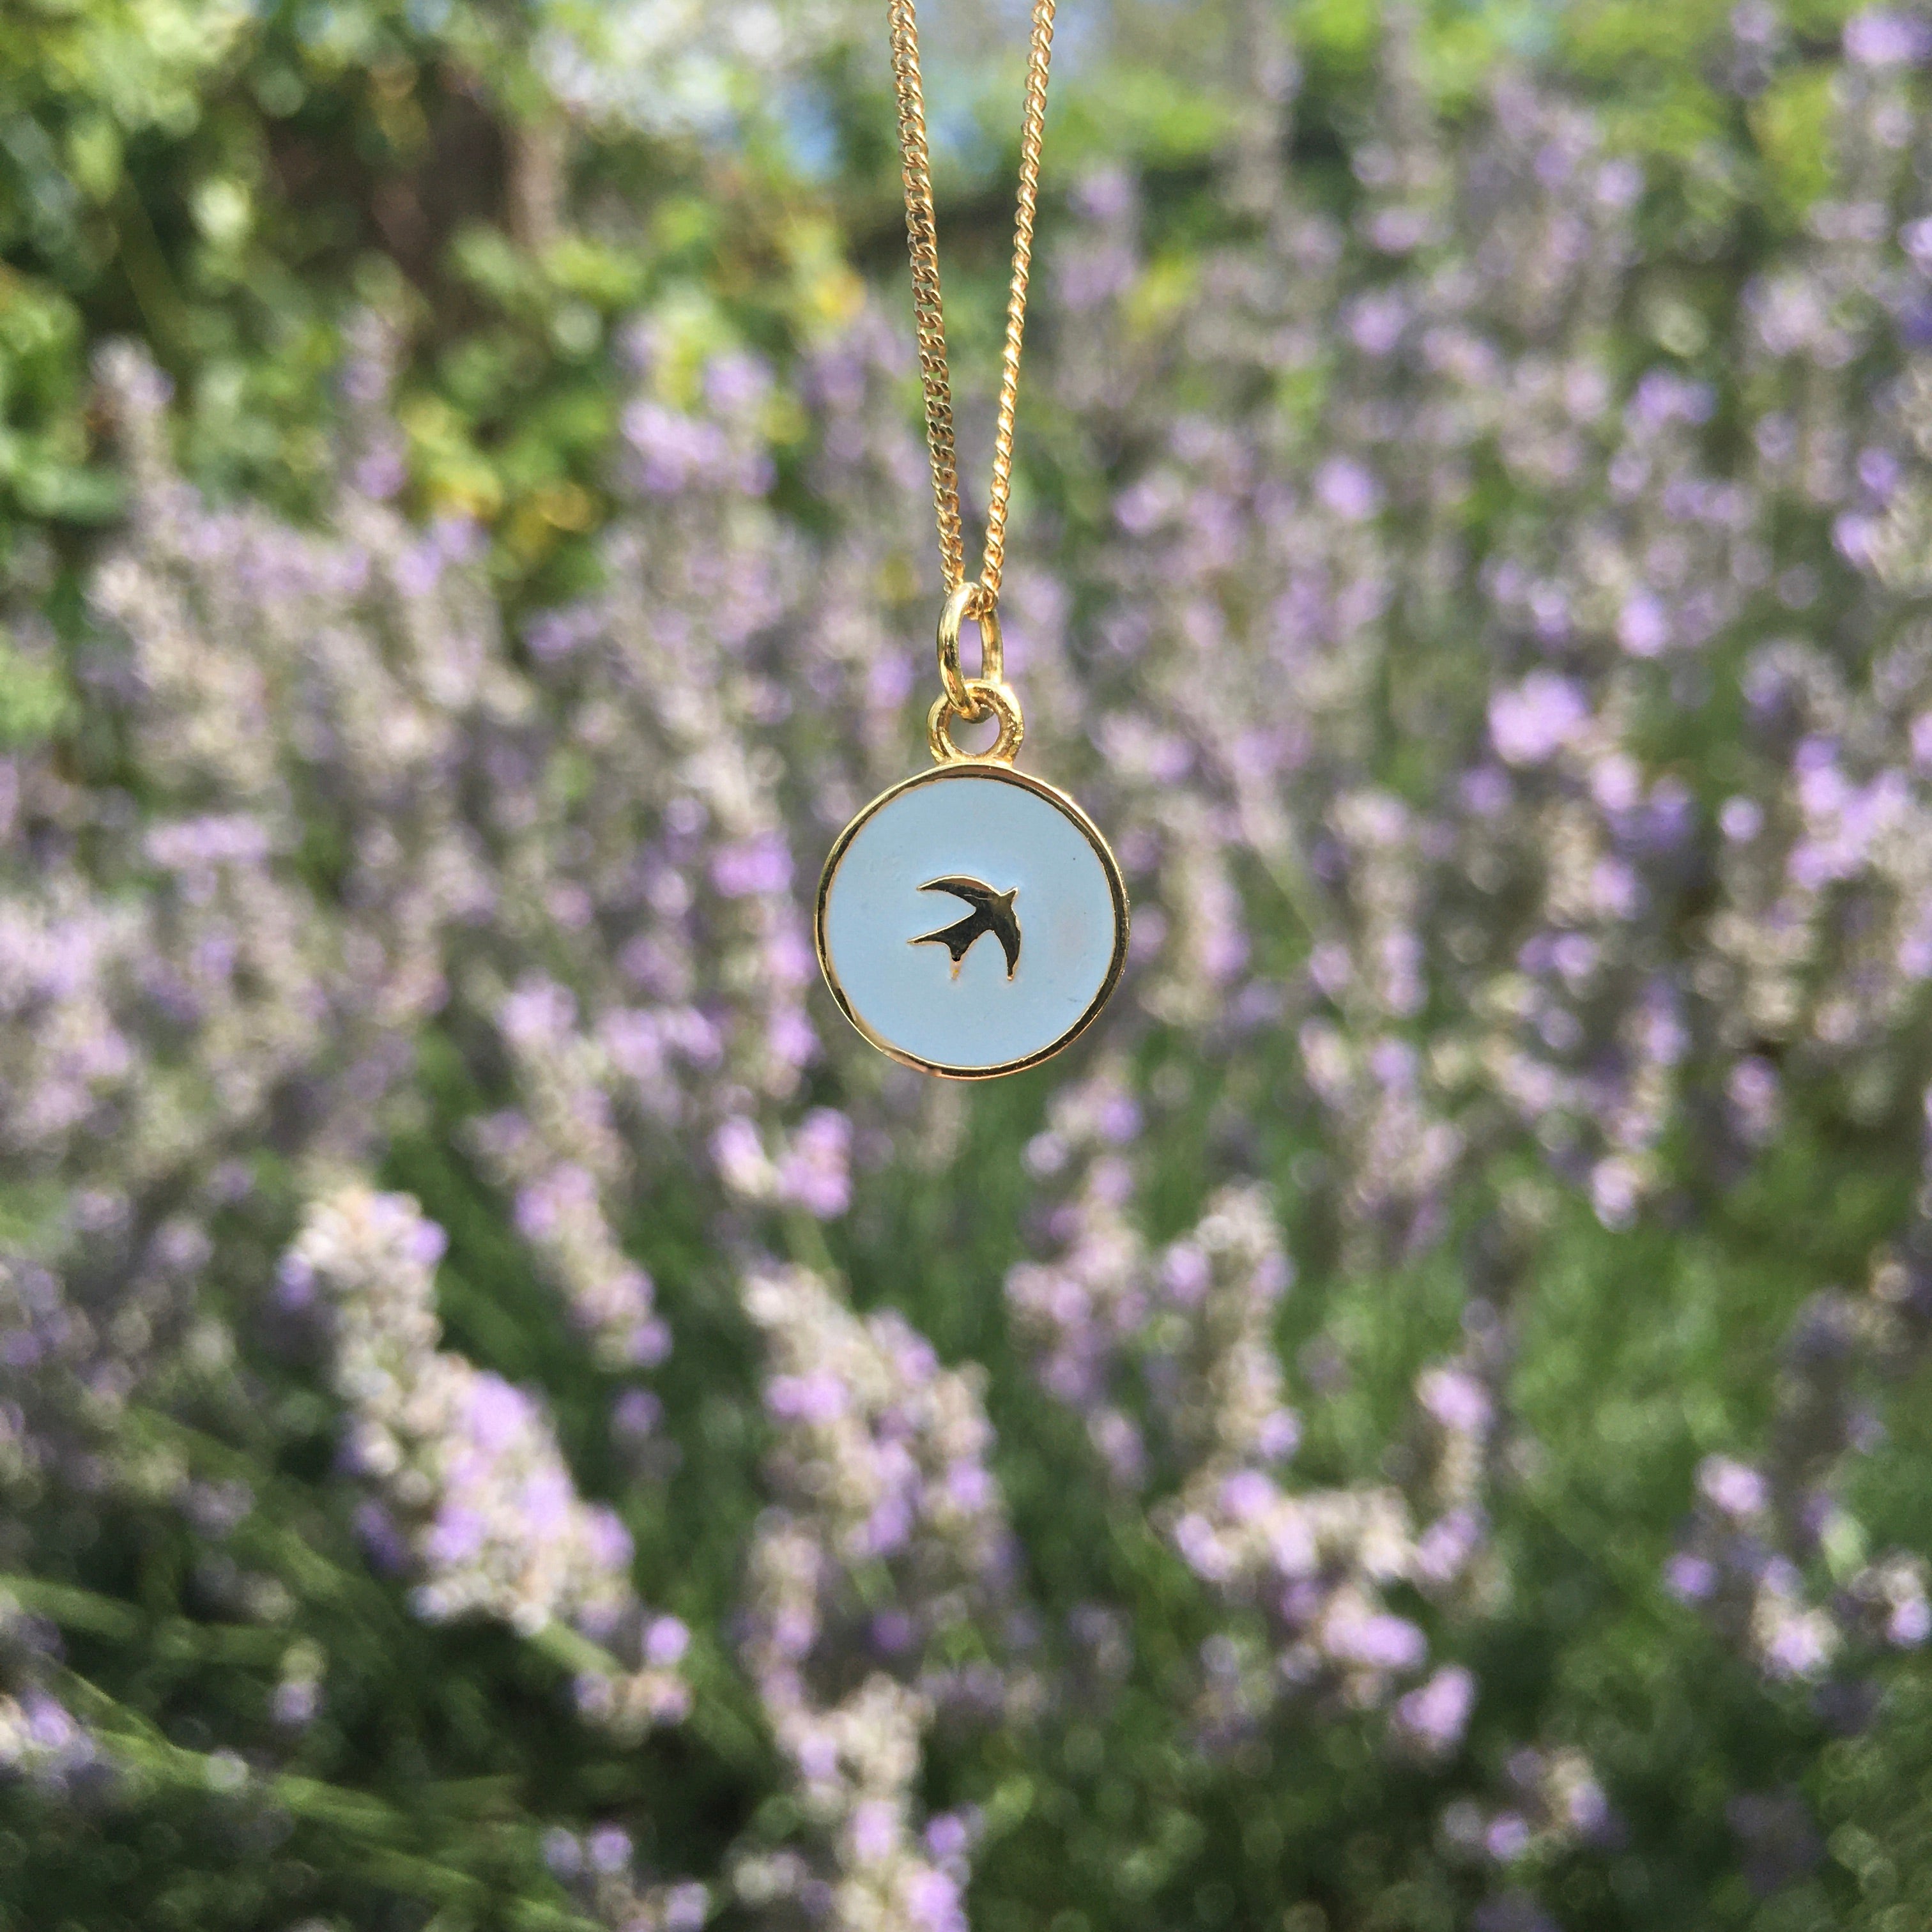 Swallow necklace with lavender behind